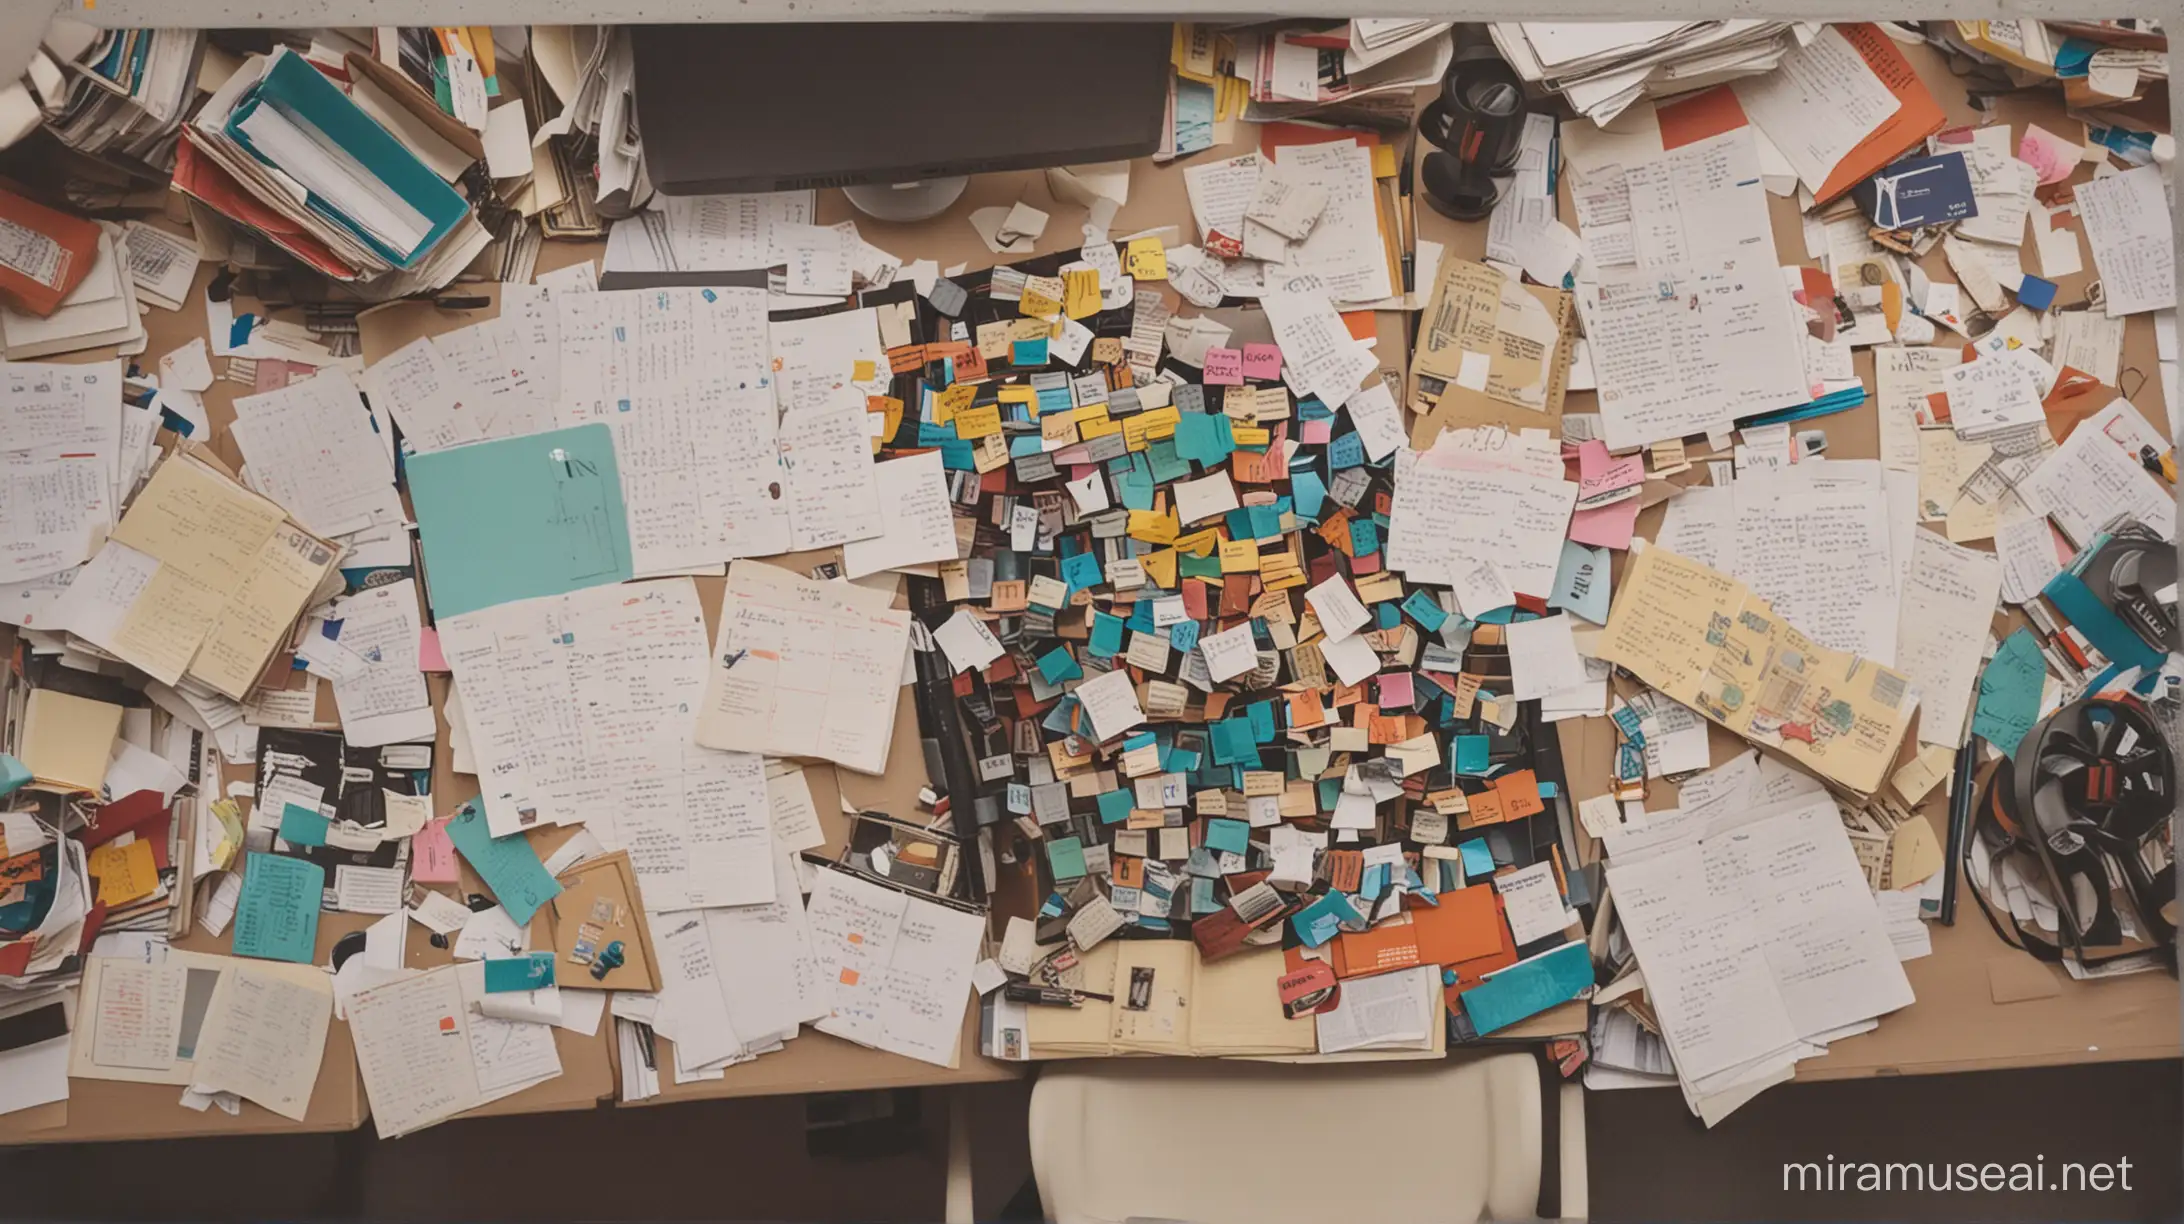 Scattered vs. Organized Desk: A split image. One side shows a messy desk overflowing with books and papers, representing Maya's disorganized approach. The other side shows Alex's desk with color-coded notes, a planner, and neatly stacked books, symbolizing his meticulous planning.